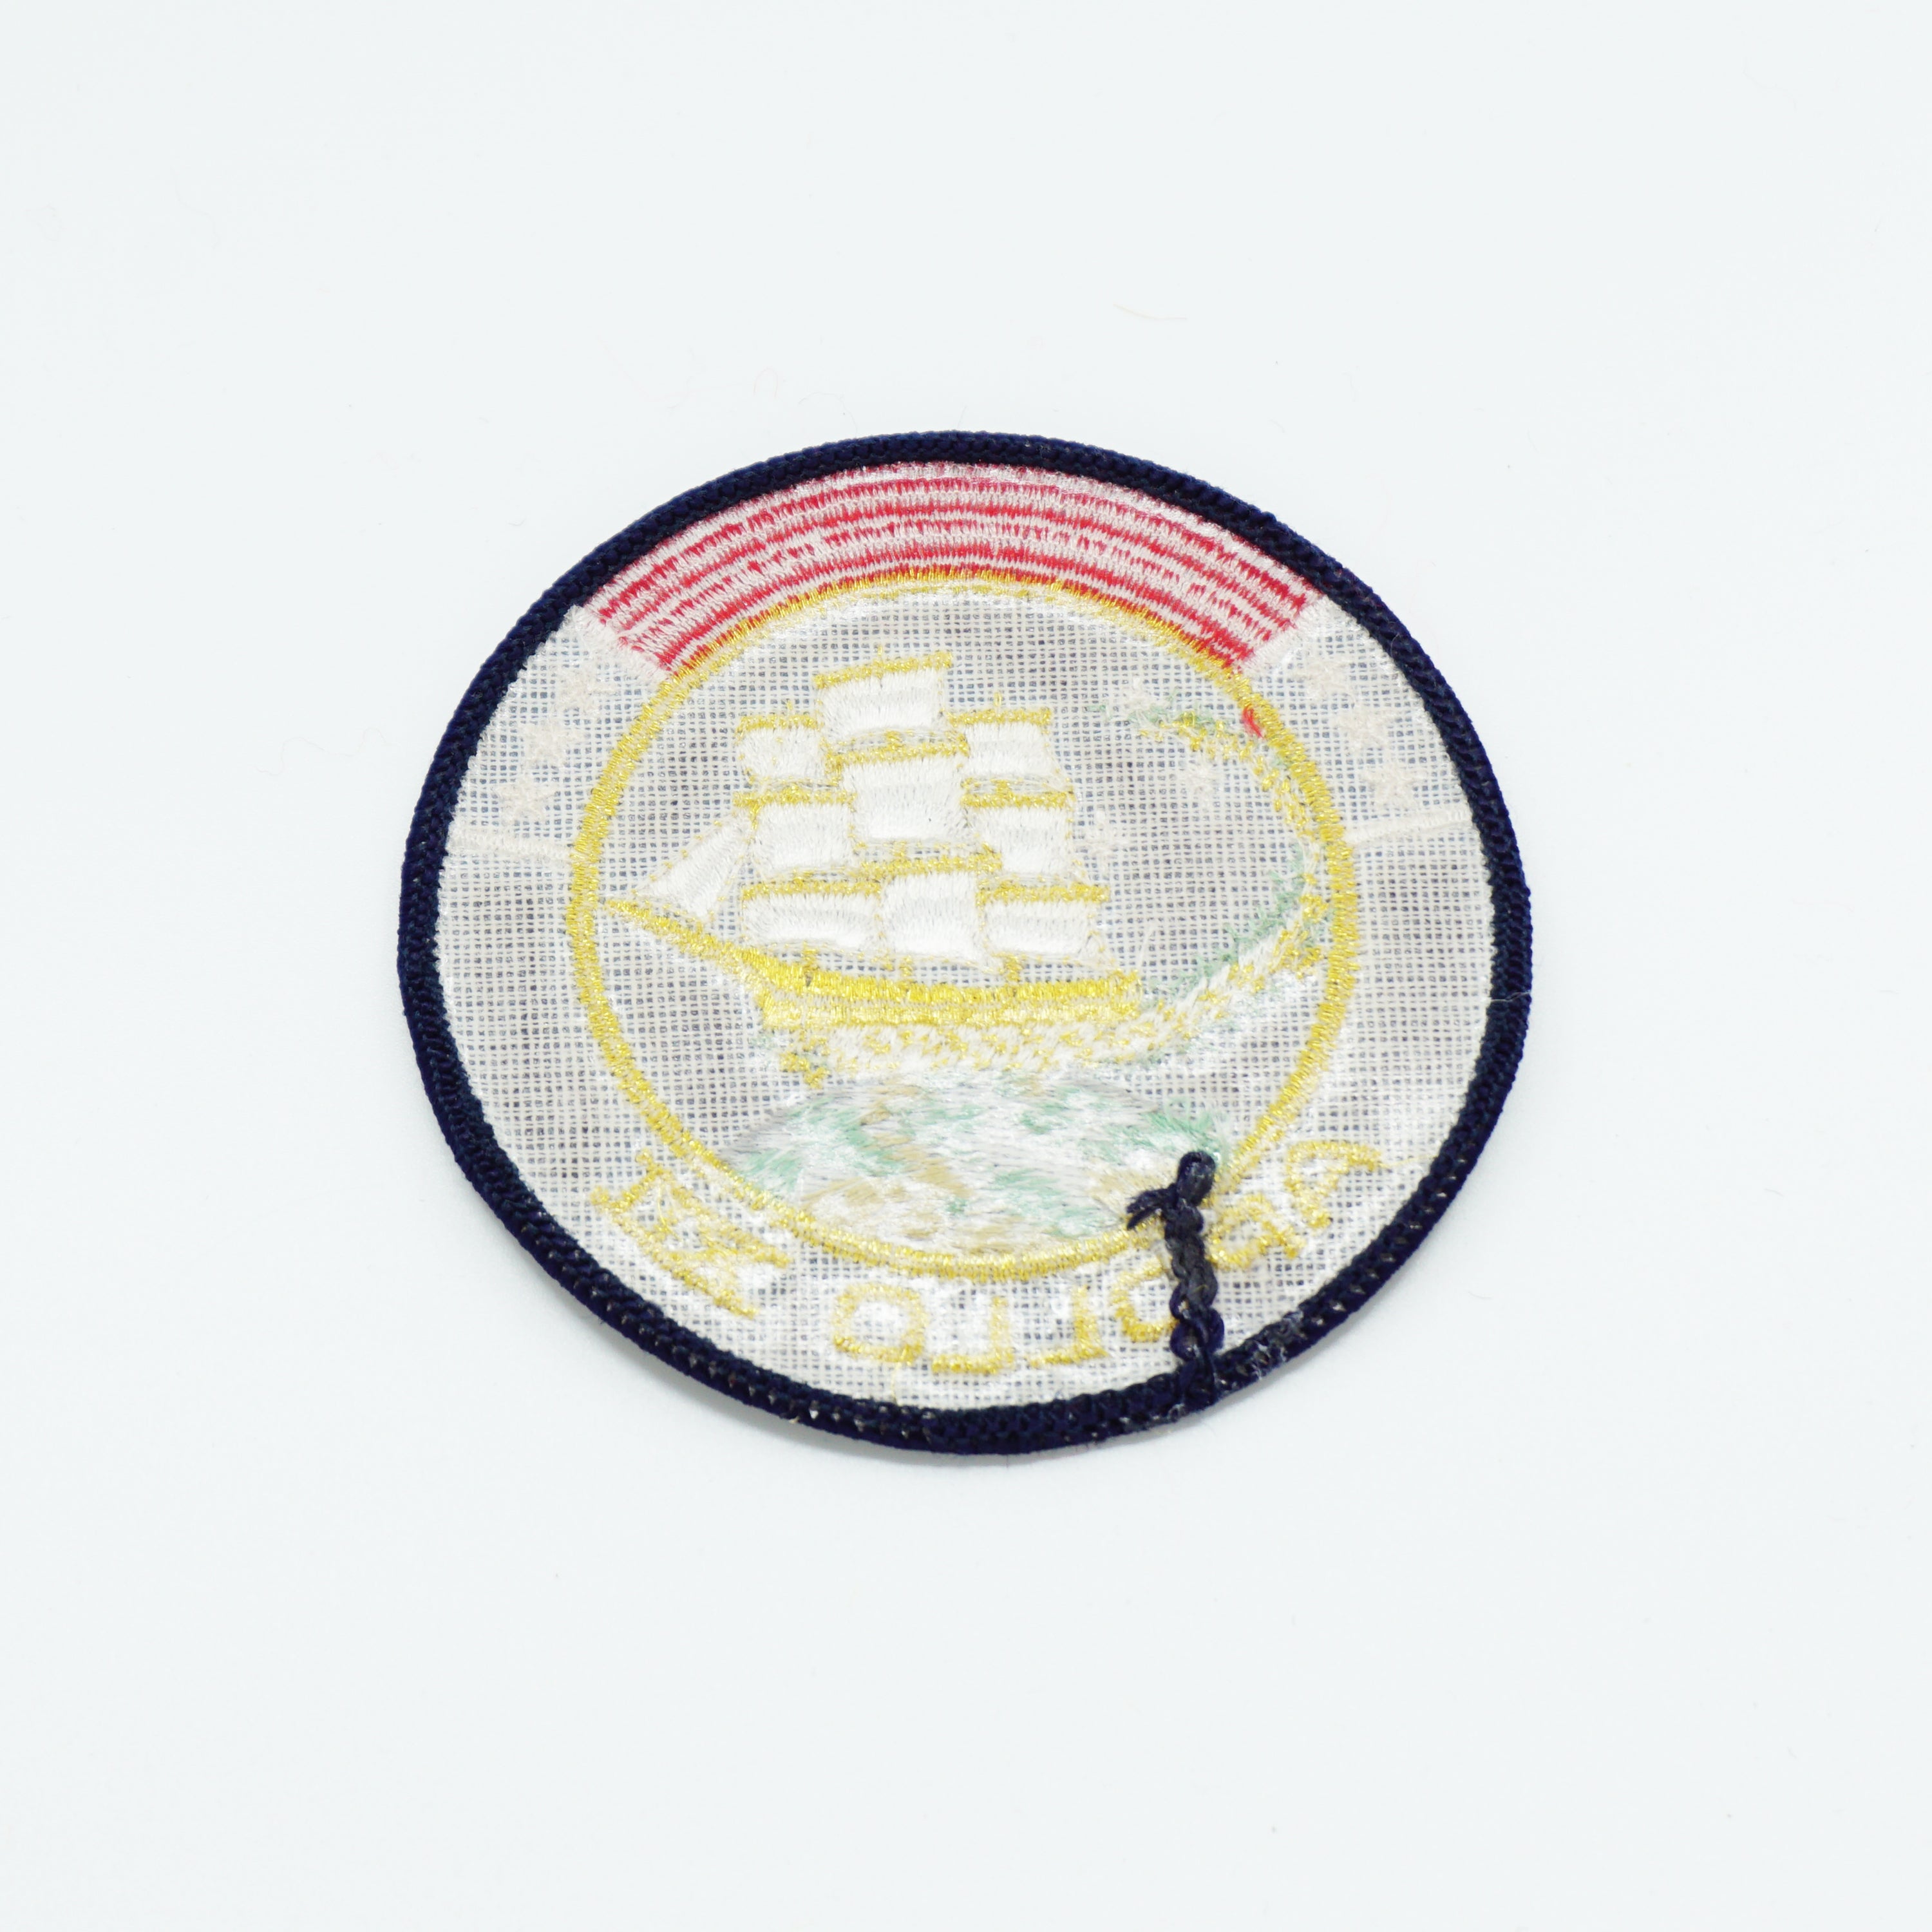 Apollo XXII Clothing Patch. 3.5" Round. White Sailboat, Blue, Gold, Red Details.